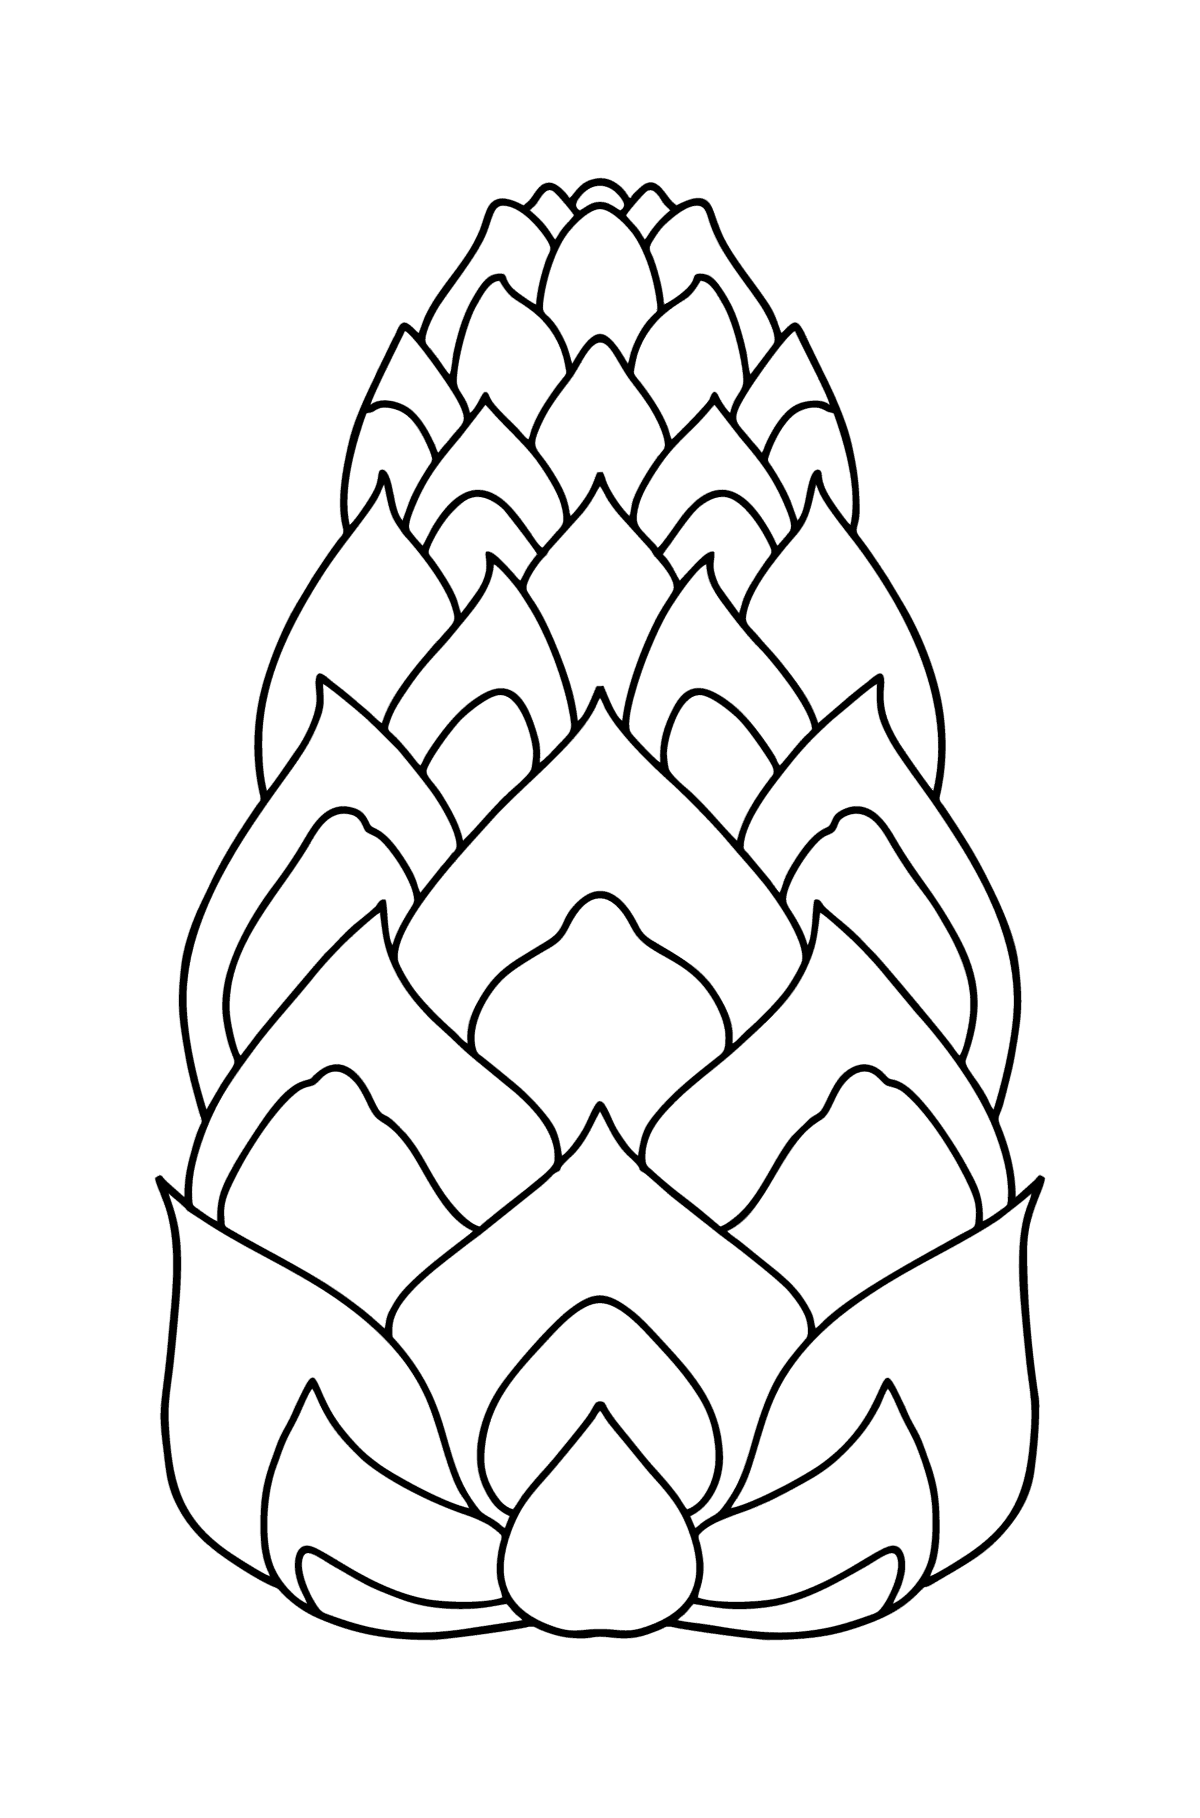 Pinecone from Lambert coloring page - Coloring Pages for Kids